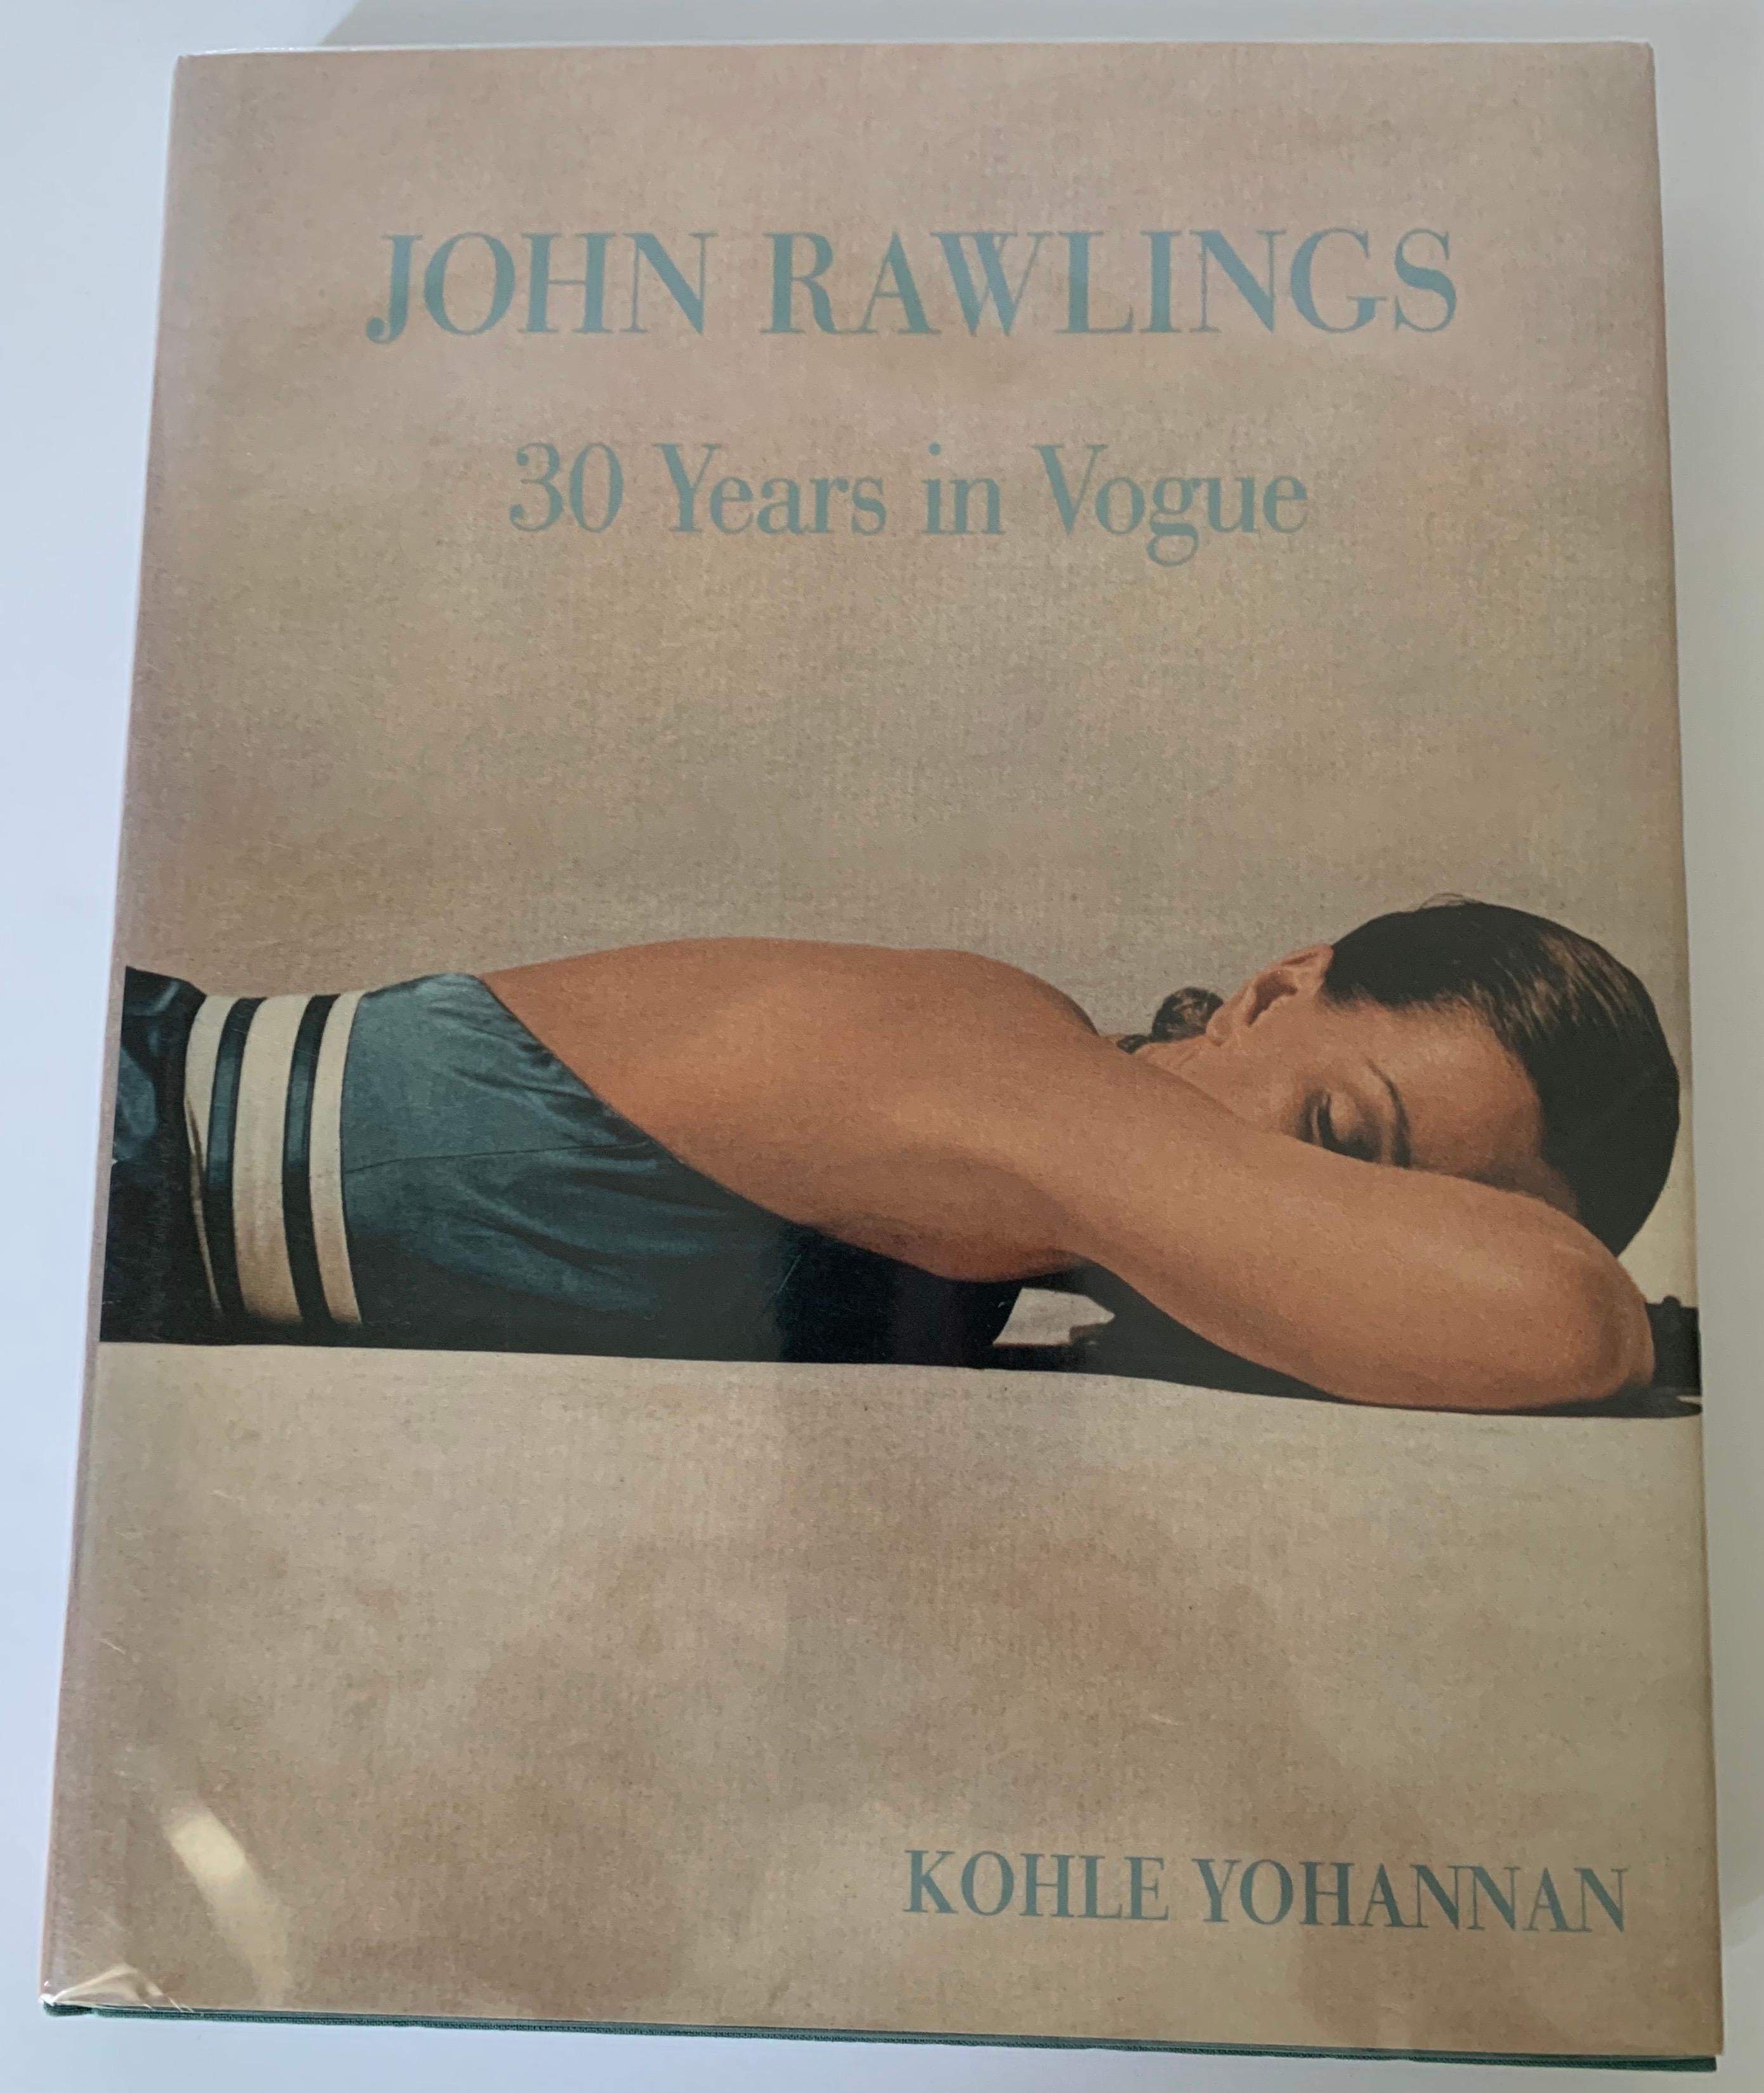 John Rawlings 30 Years in Vogue hardcover first edition. Featuring the photographs of noted fashion photographer John Rawlings and his work with Vogue magazine.
Dust jacket is wrapped in Mylar.